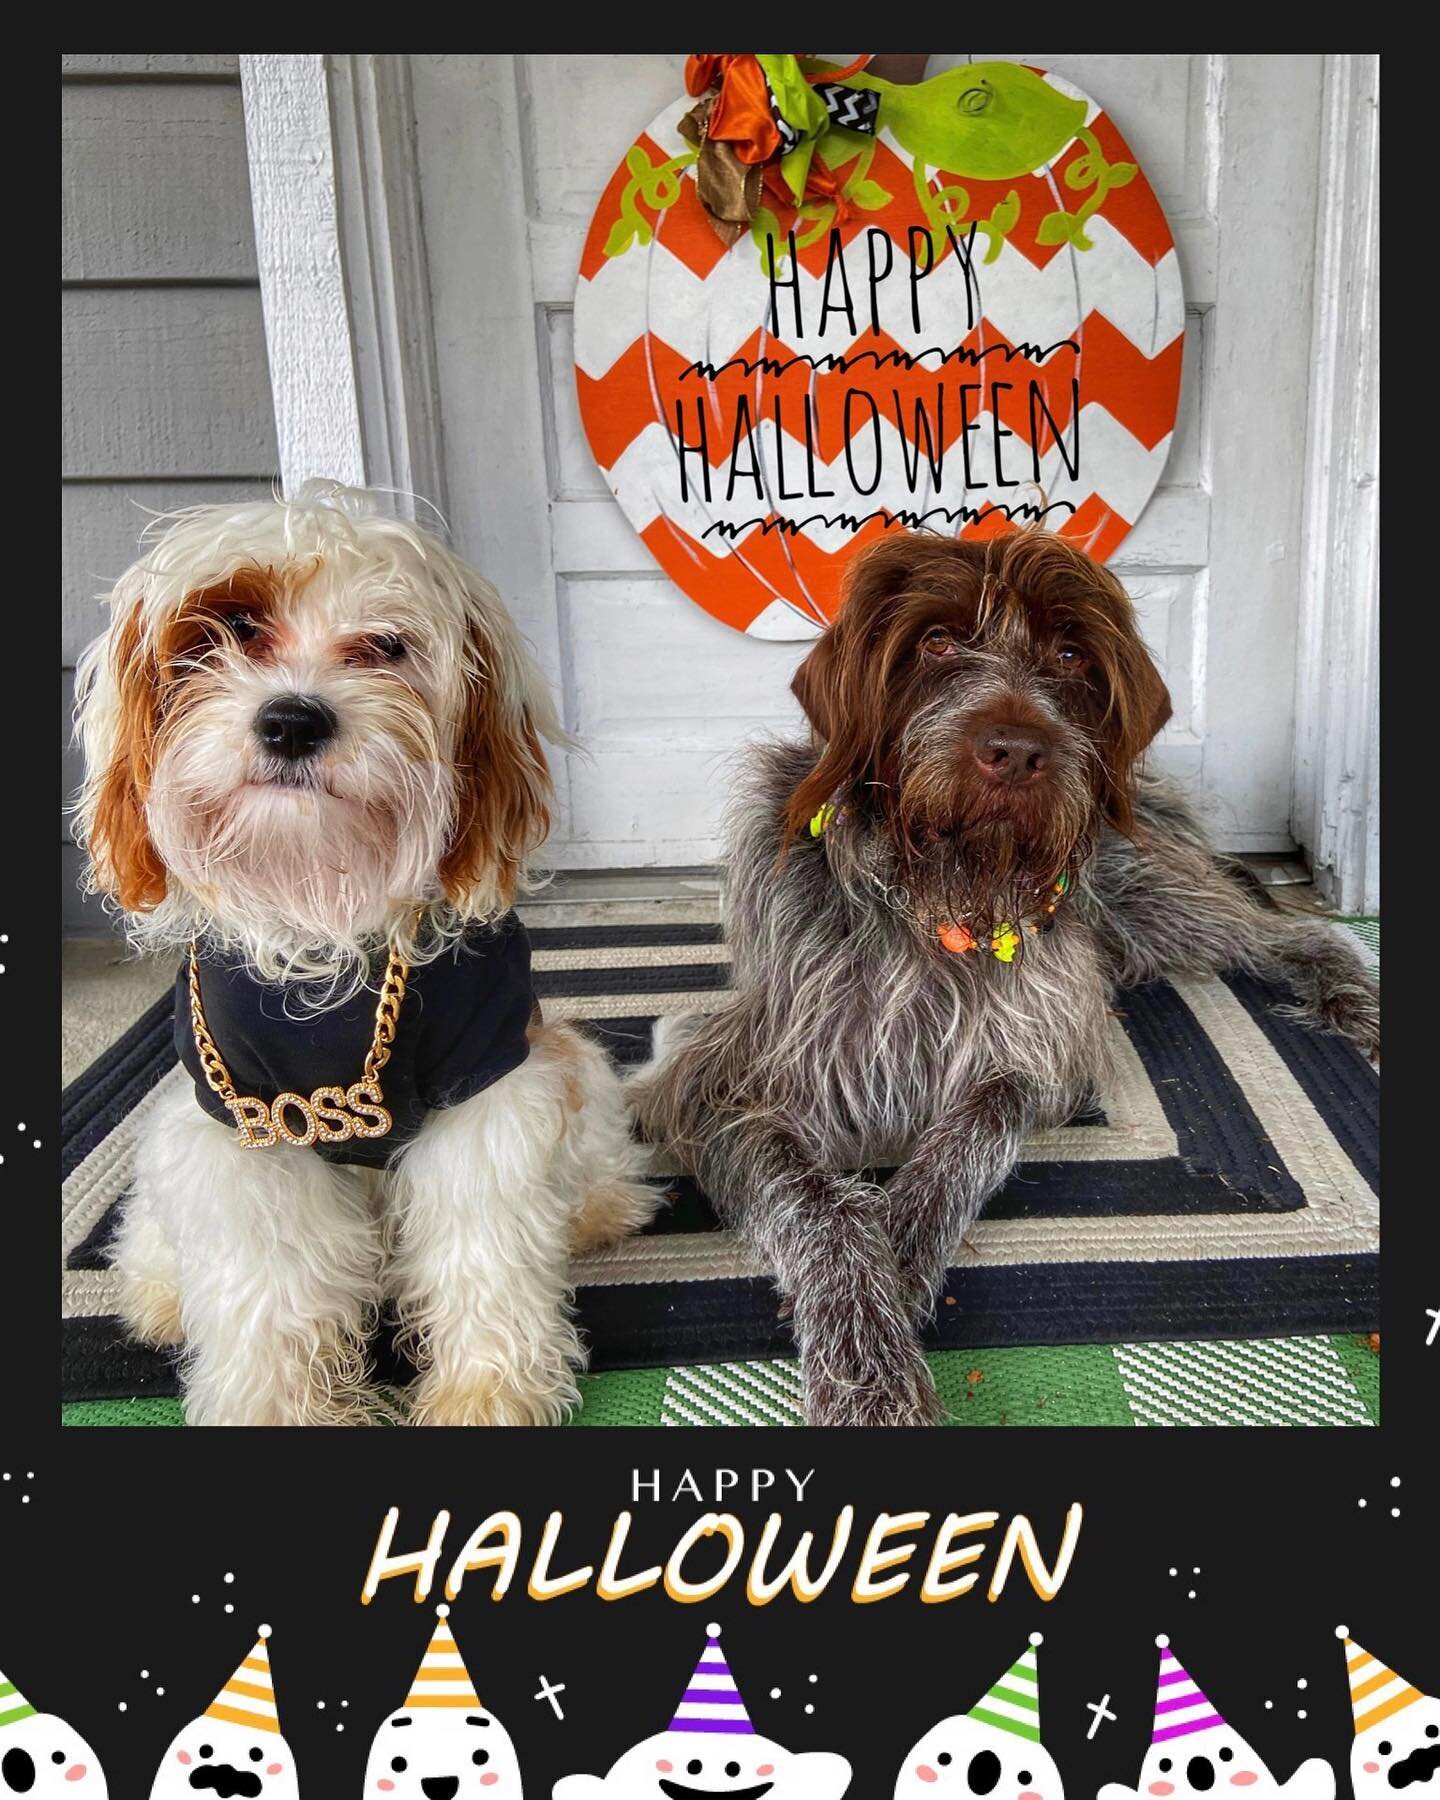 The dashing lad and the little boss dog, would like to wish everyone a HAPPY HOWEELLLLOWEEN!